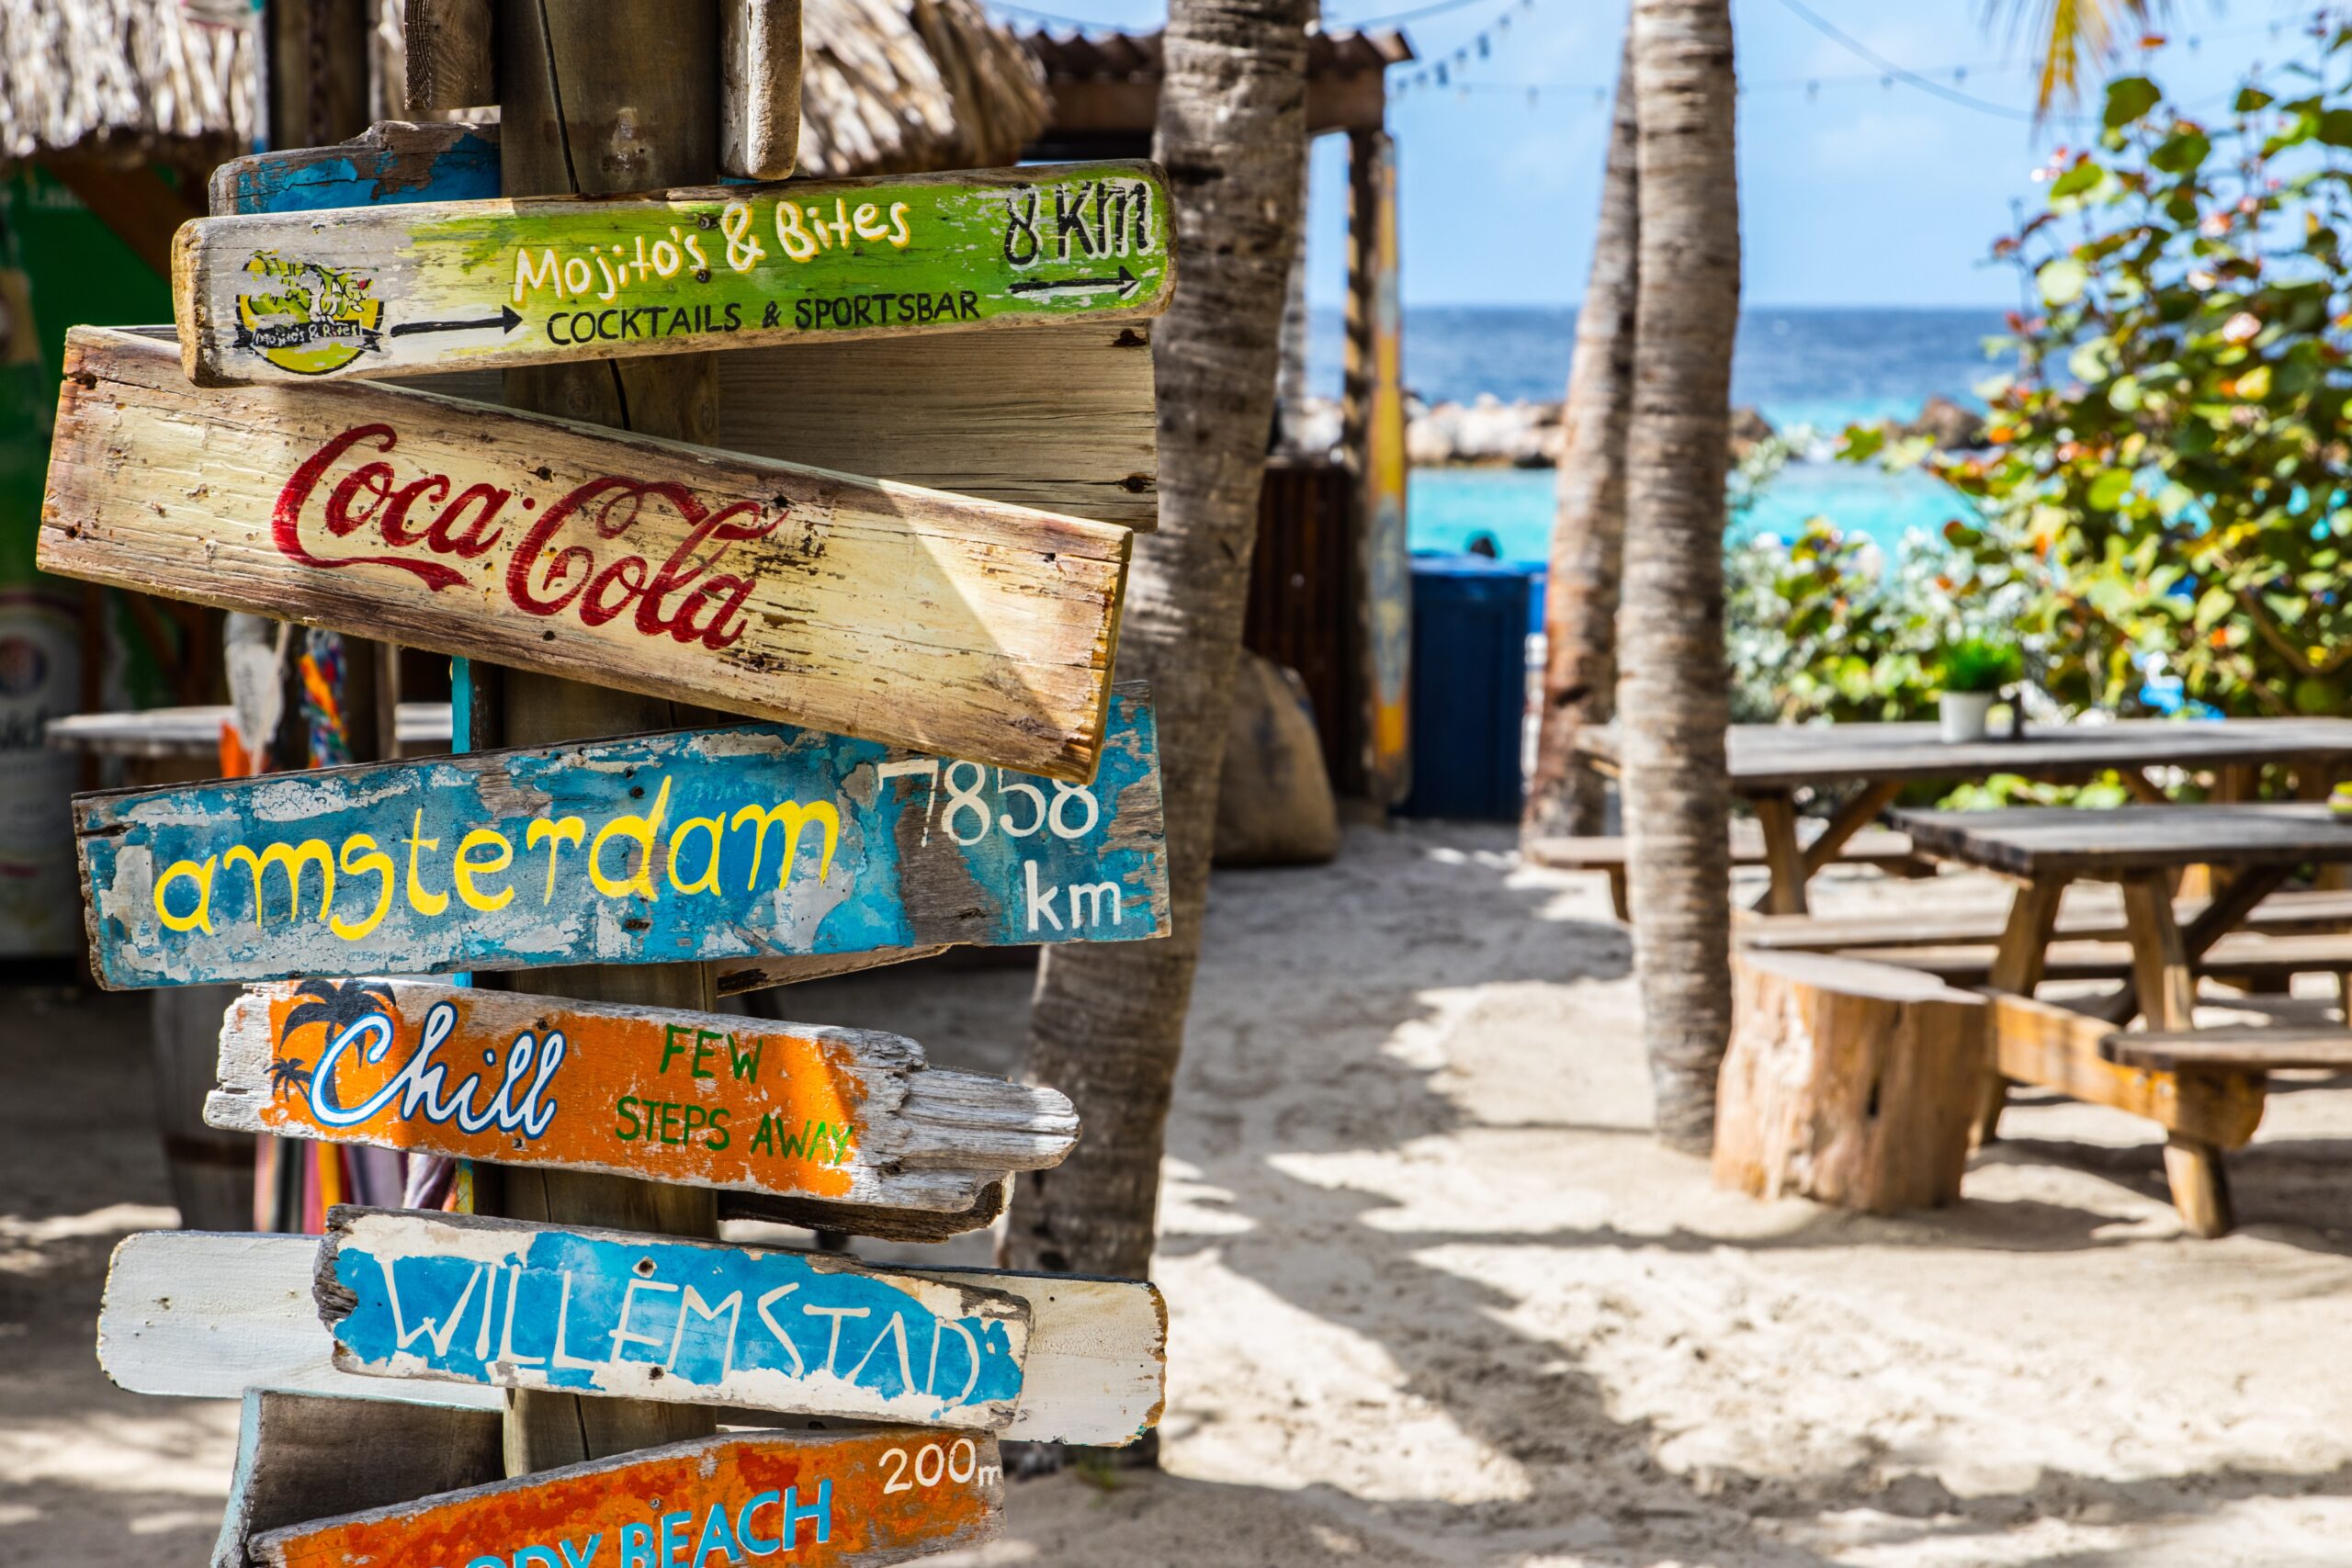 Safety is a concern for man tourists considering a visit to Curaçao, Check out all the safety information that is needed before making travel plans.
pictured: a wooden beach directory in Curaçao that informs visitors where to go  